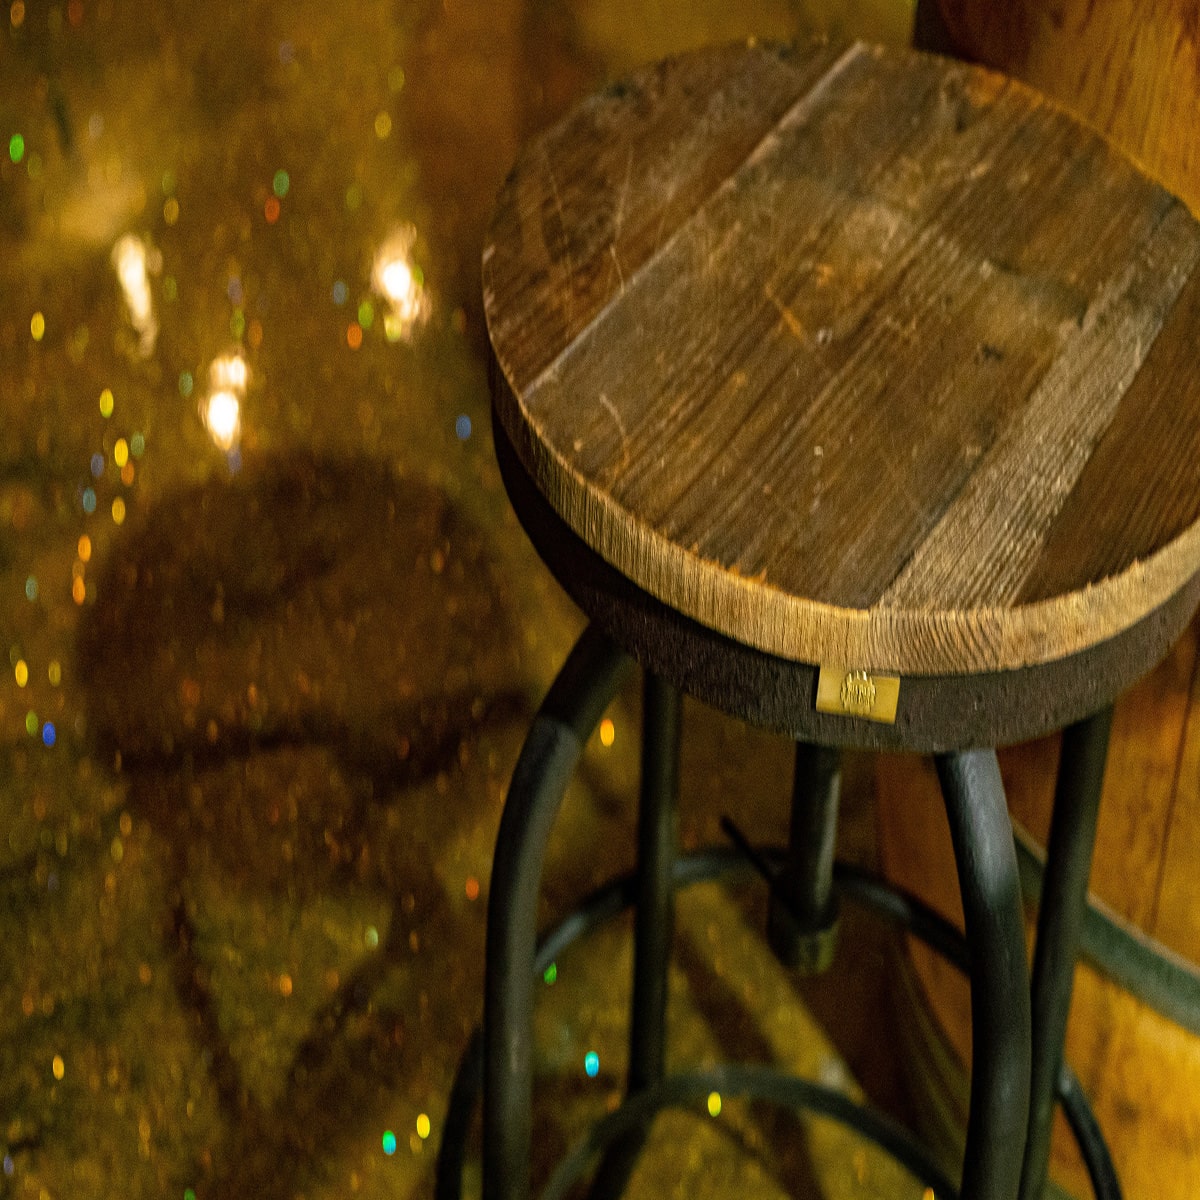 Glittery gold epoxy resin installed in a bar room floor.